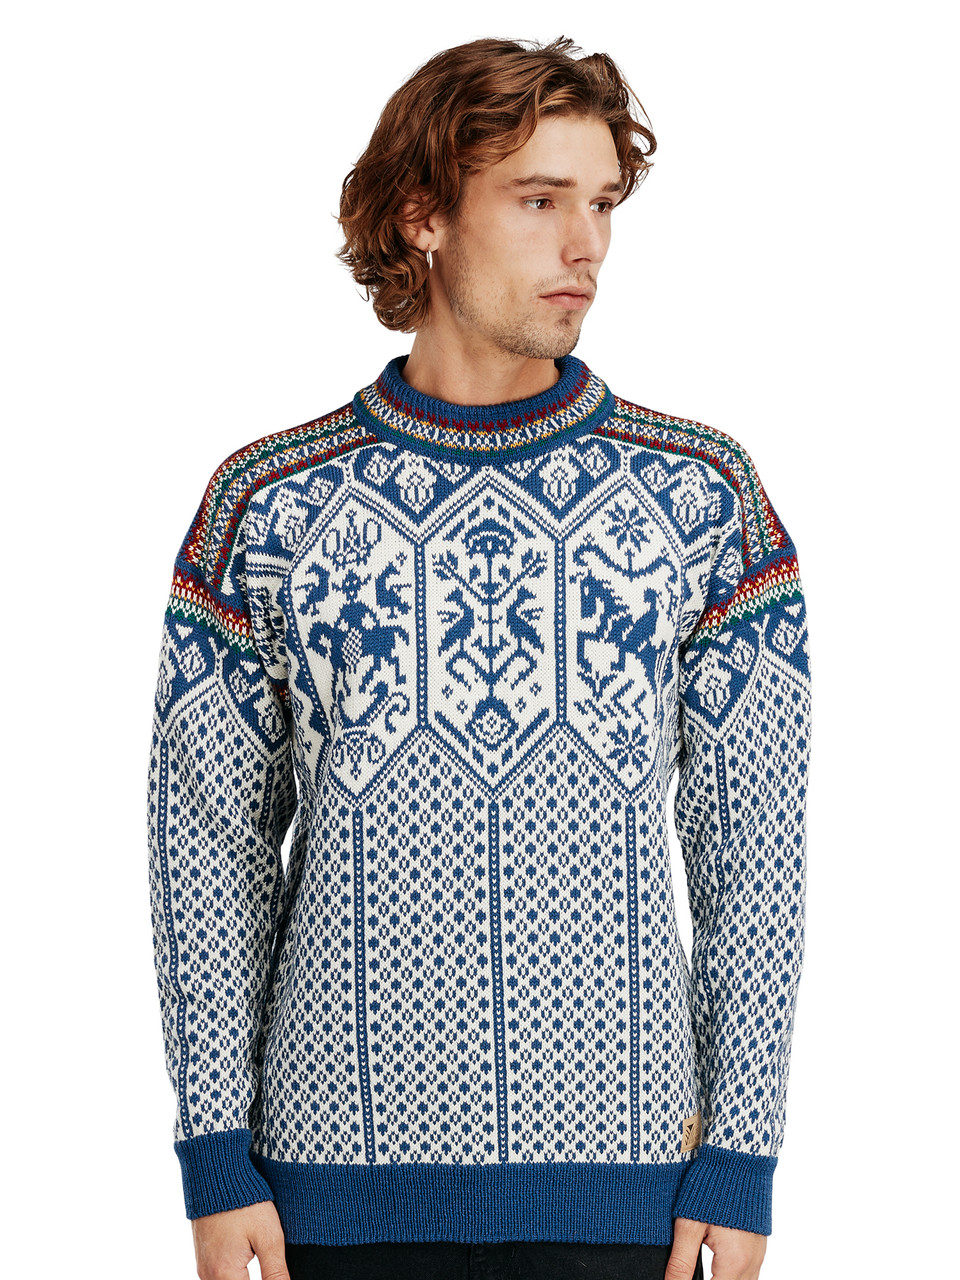 Dale of Norway - 1994 Mens Sweater: Indigo/Off White/Bottle Green ...